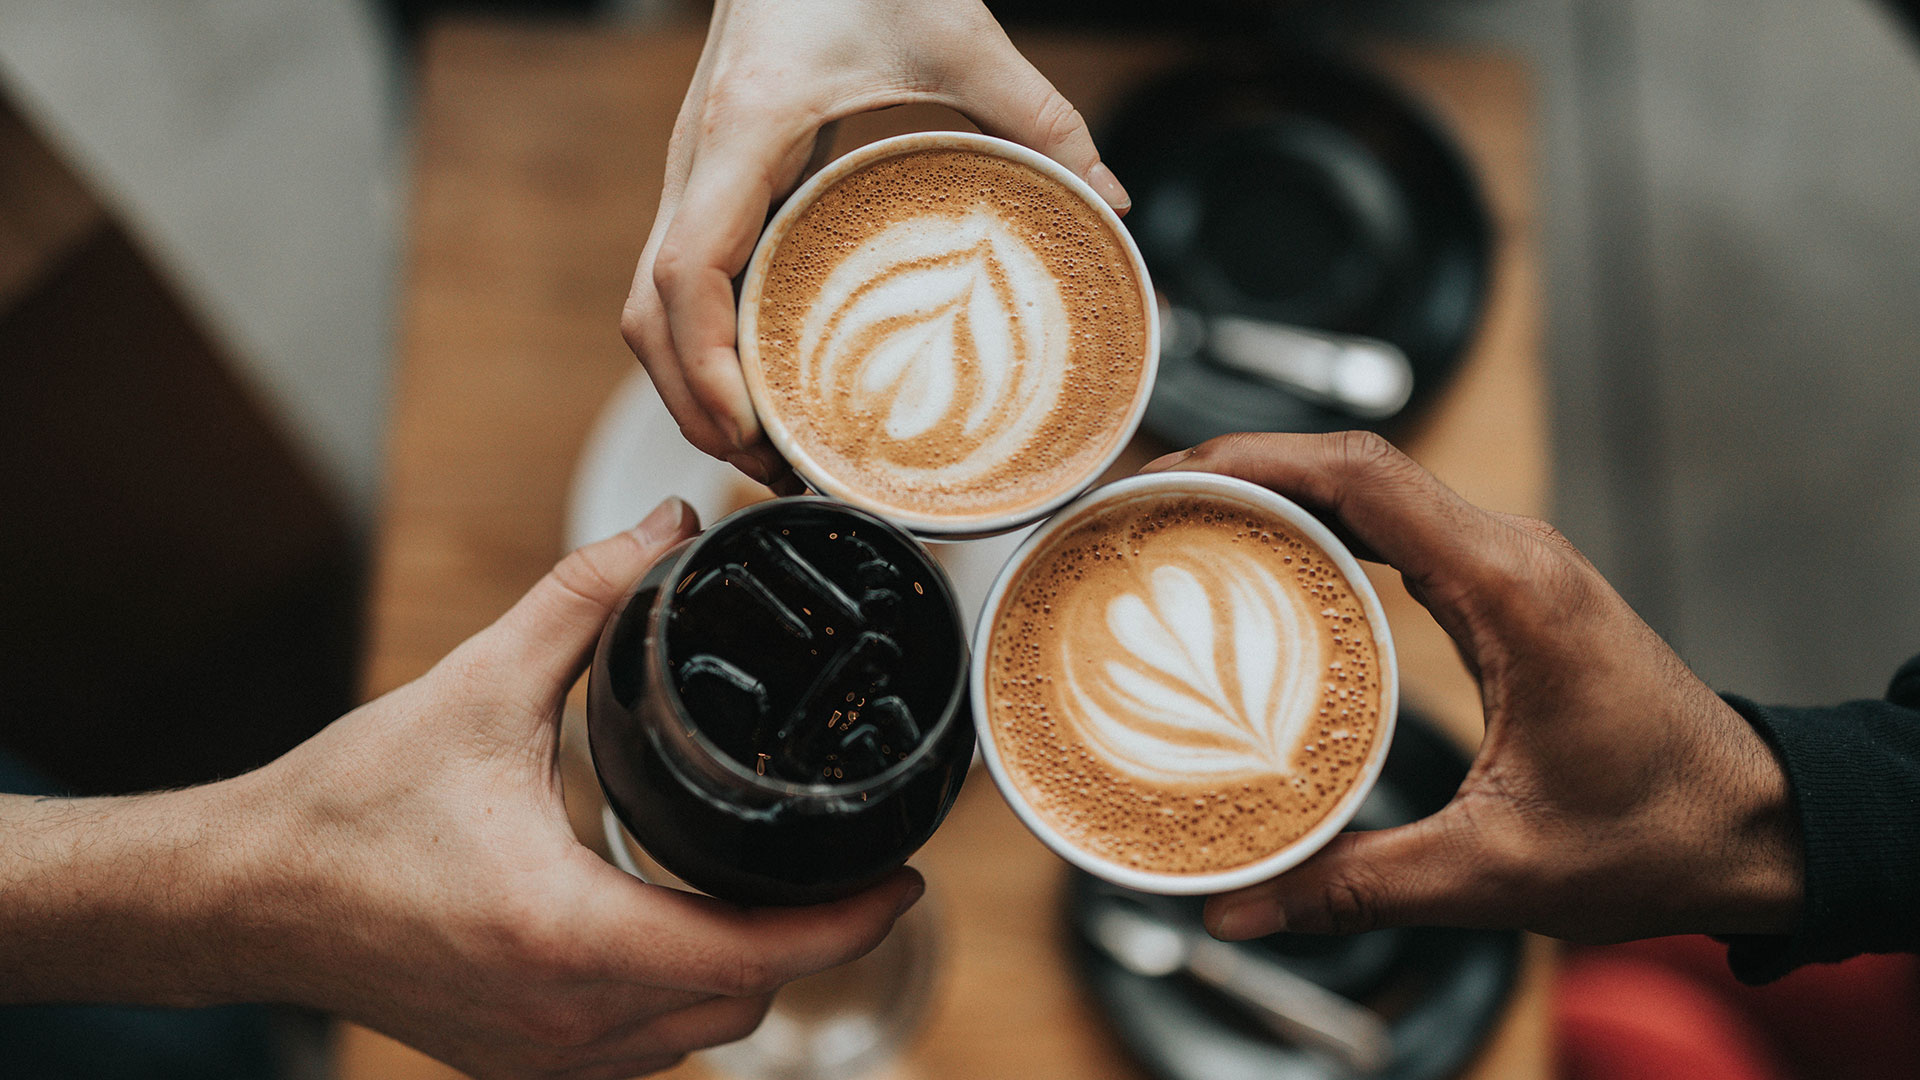 Young people's hands holding coffee cups